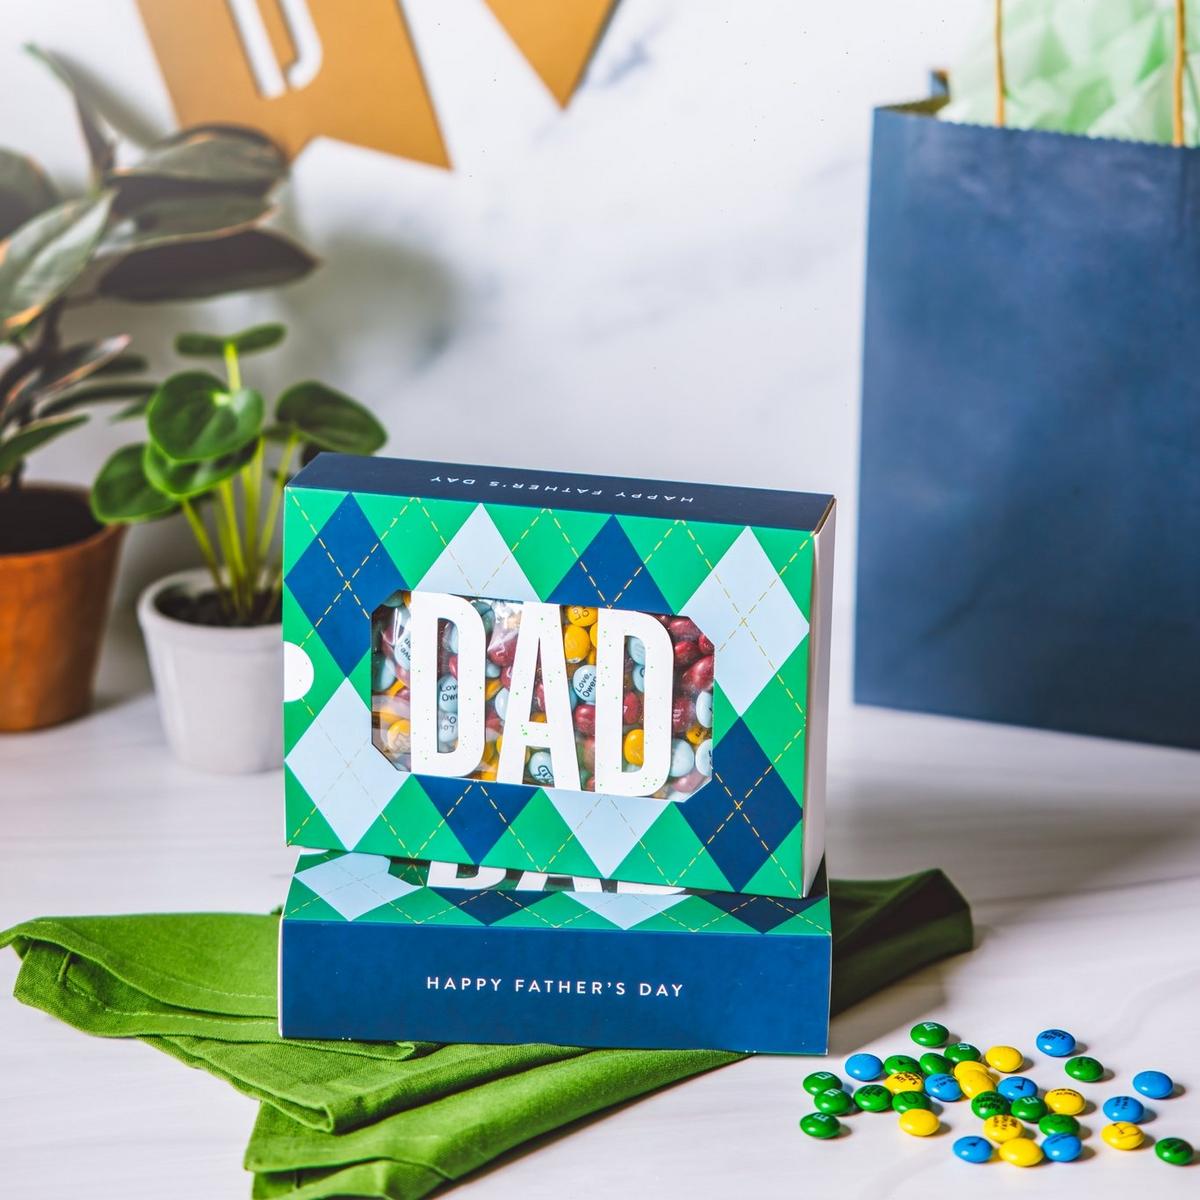 Dad gift box on table